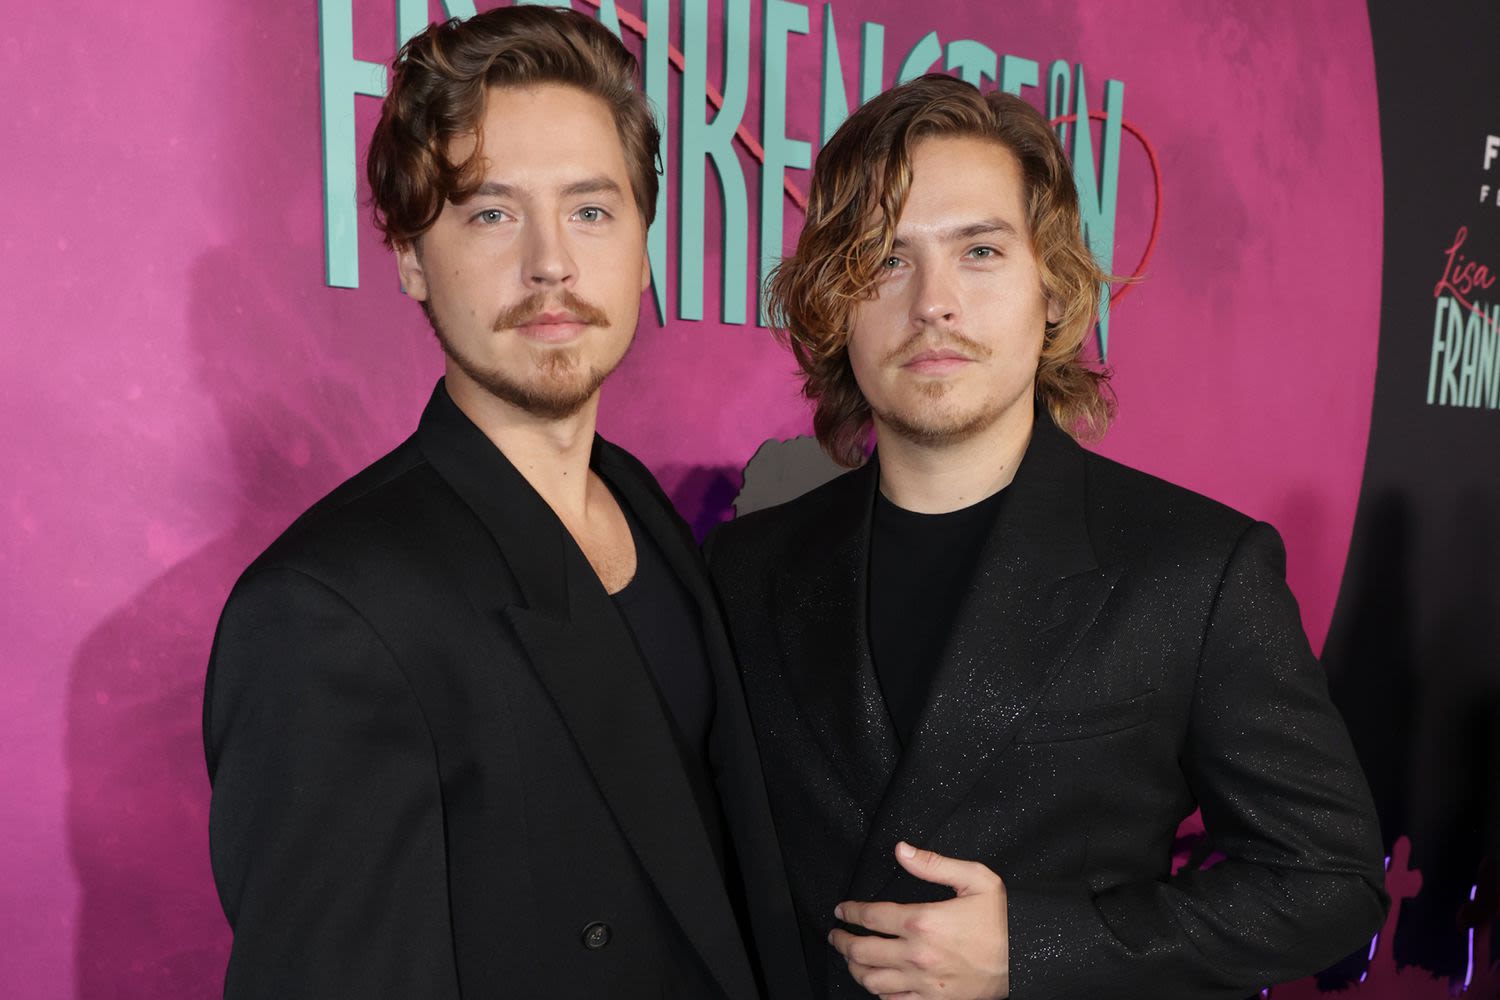 Dylan Sprouse wants to cast twin Cole in roles 'where he gets killed' in violent ways